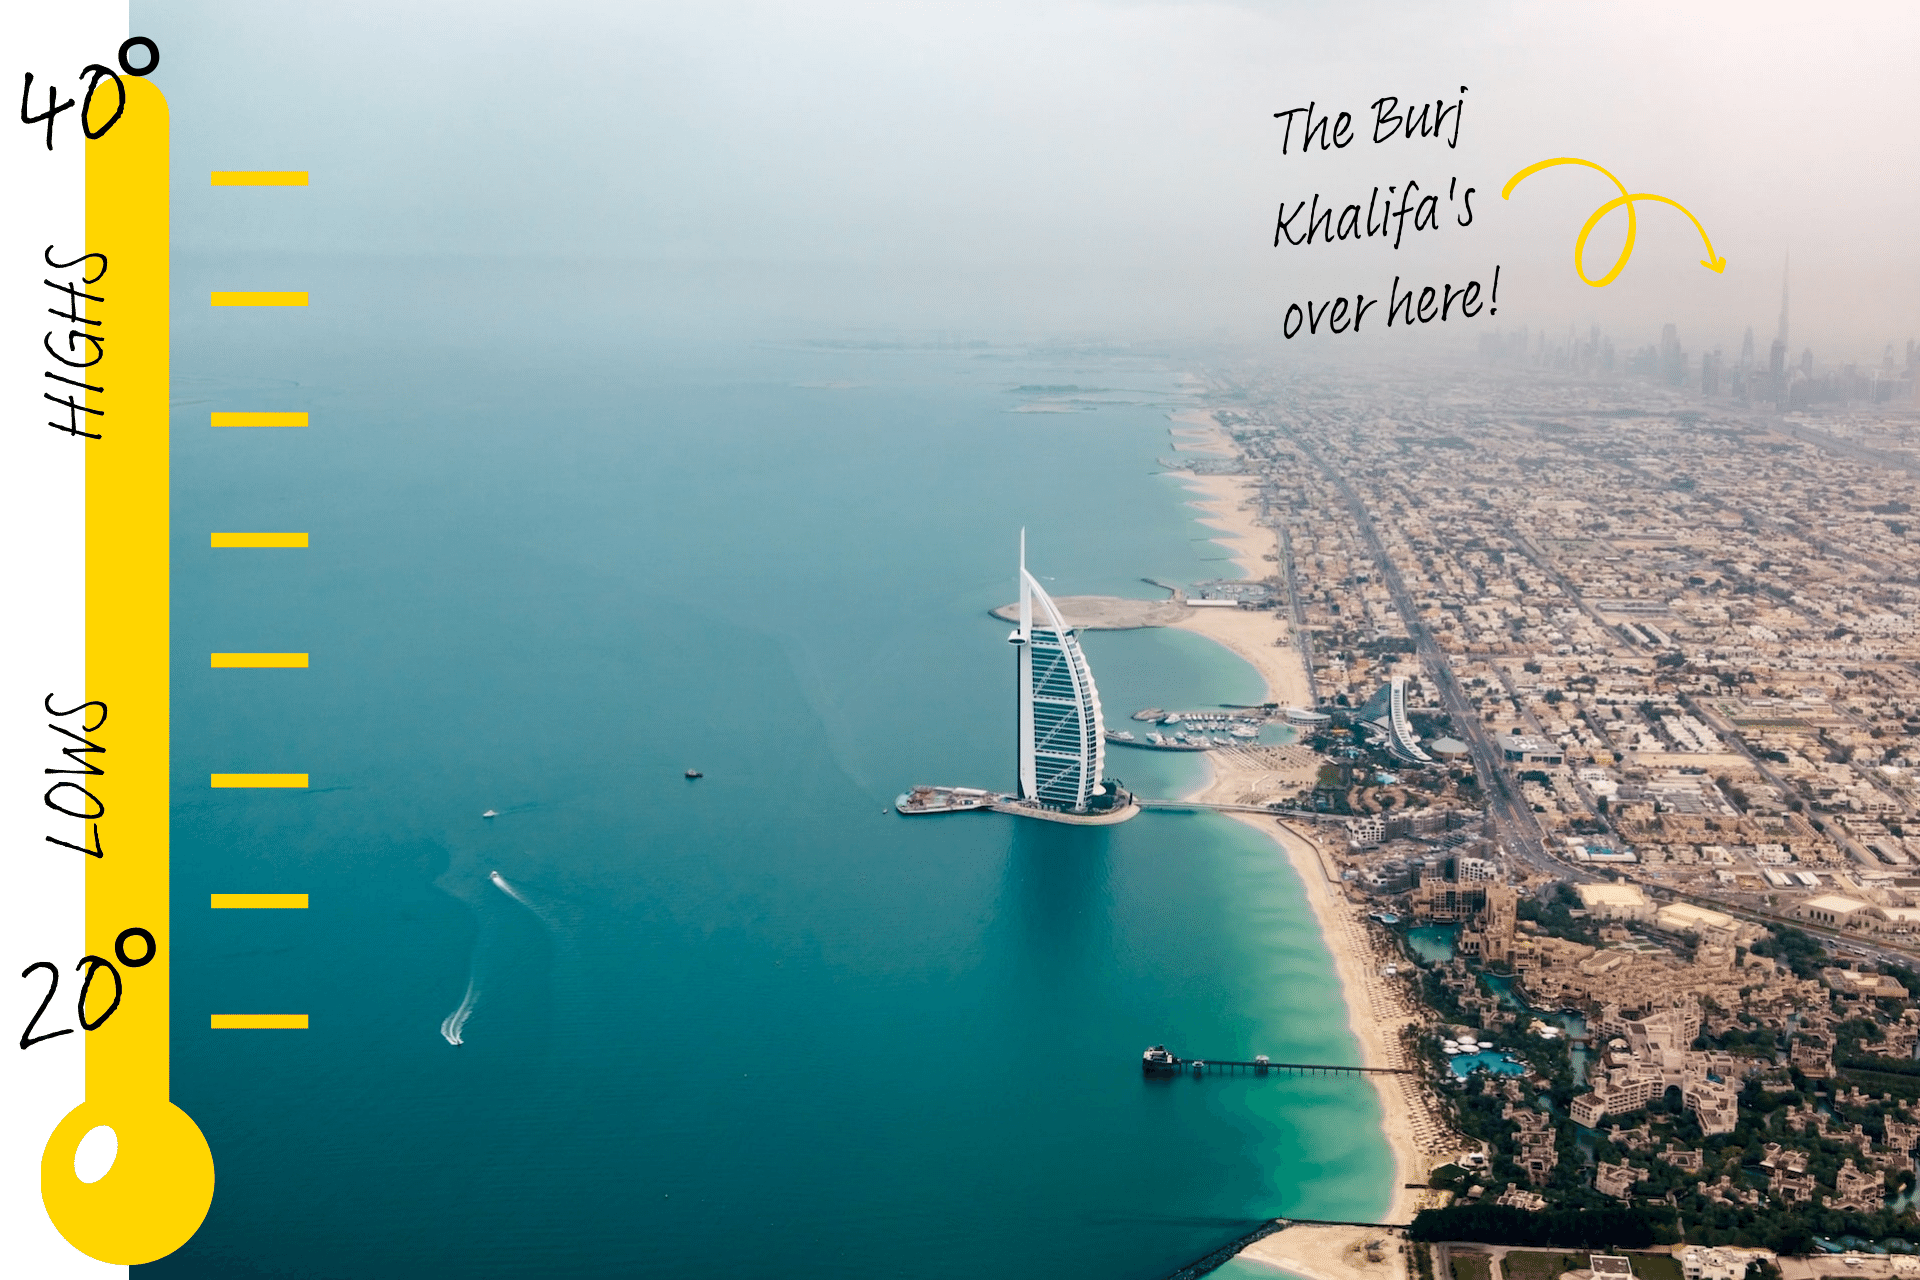 An aerial view of the shoreline of Dubai meeting the Arabian Gulf, with a thermometer doodle on top illustrating highs of 40 degrees and lows of 20 degrees. An arrow and text points out the location of the Burj Khalifa.